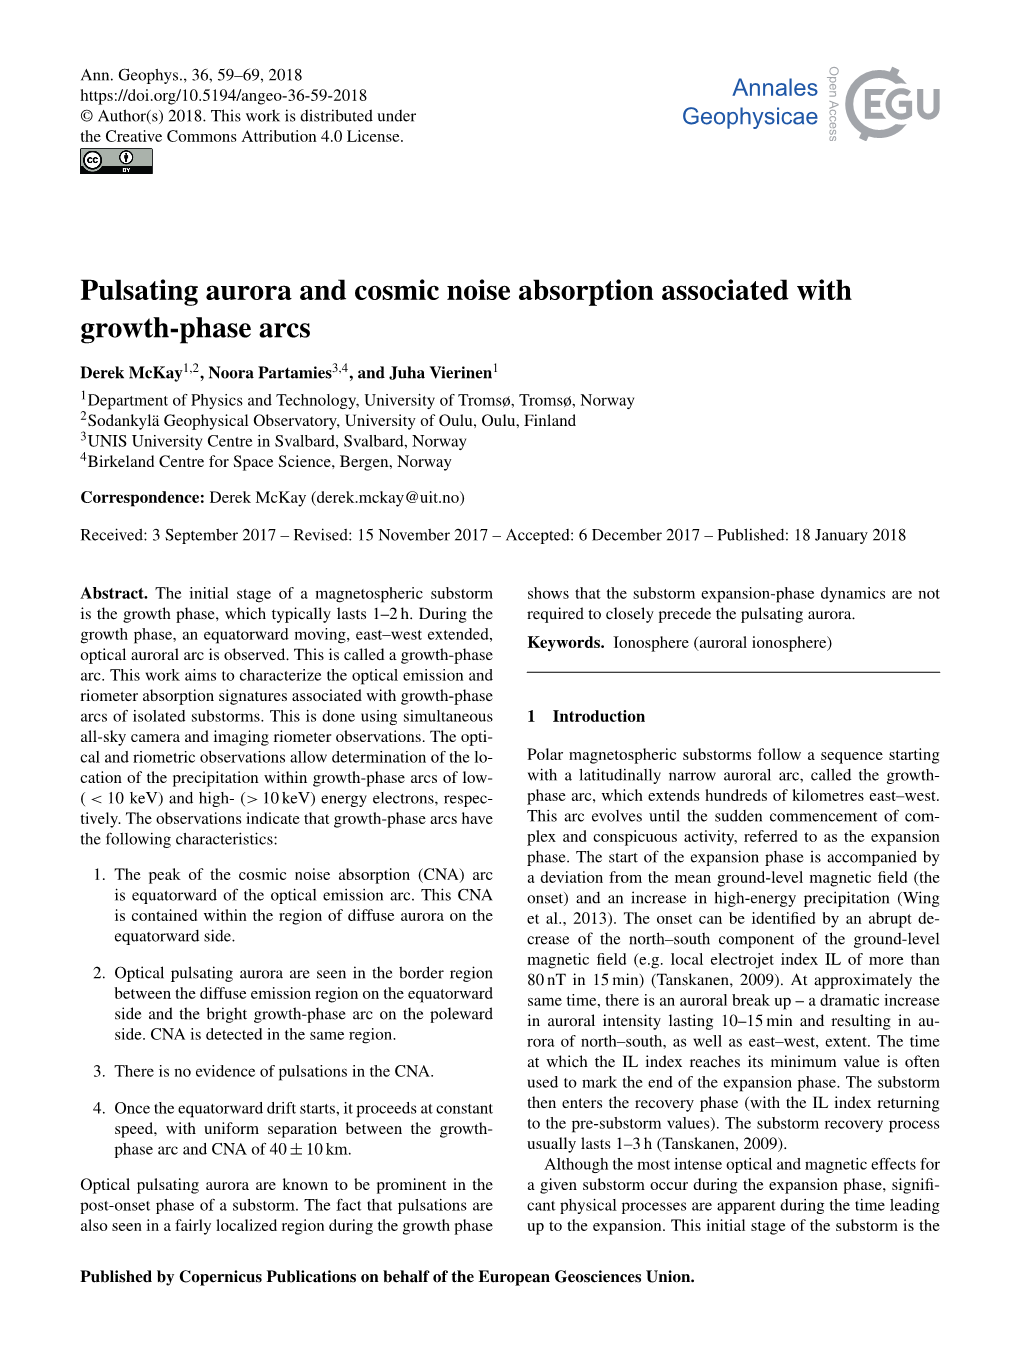 Pulsating Aurora and Cosmic Noise Absorption Associated with Growth-Phase Arcs